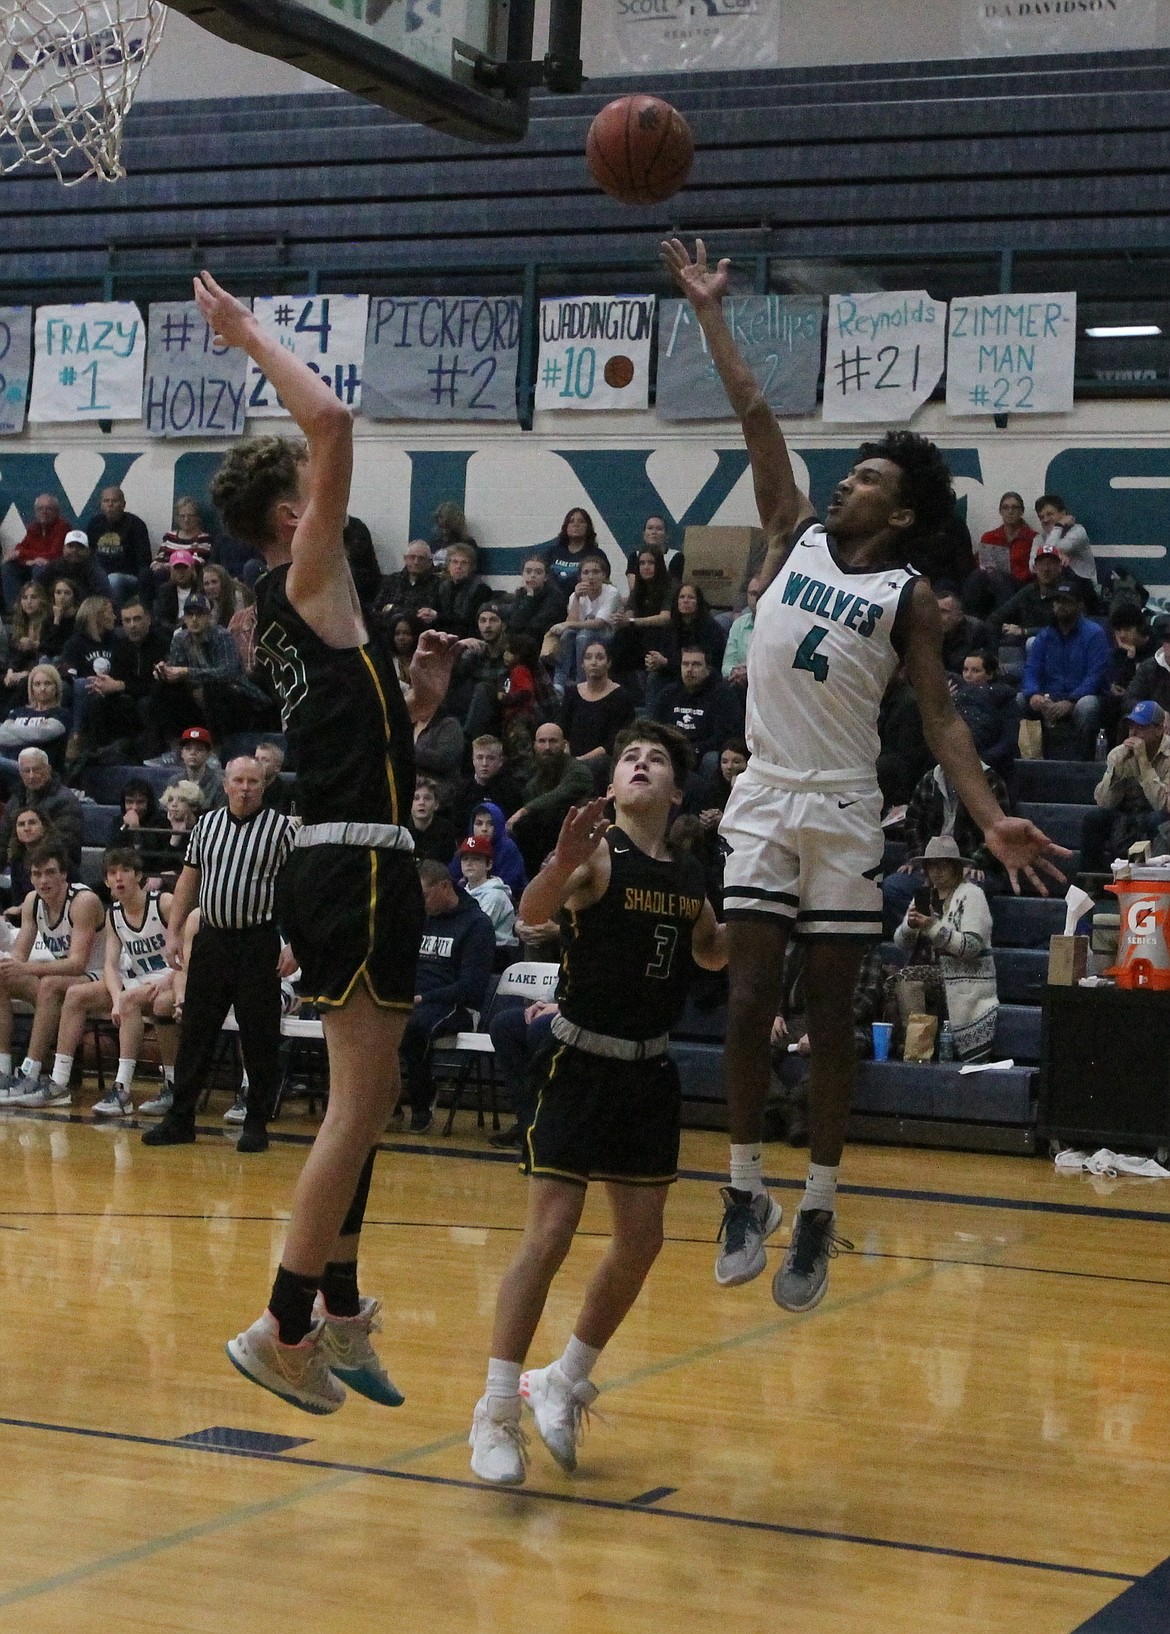 MARK NELKE/Press
Lake City freshman Cason Miller (4) shoots a runner along the baseline during the second half against Shadle Park on Tuesday night.